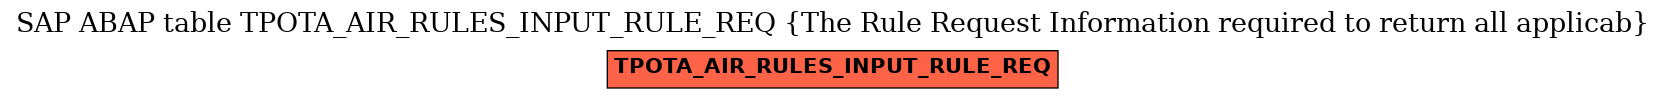 E-R Diagram for table TPOTA_AIR_RULES_INPUT_RULE_REQ (The Rule Request Information required to return all applicab)